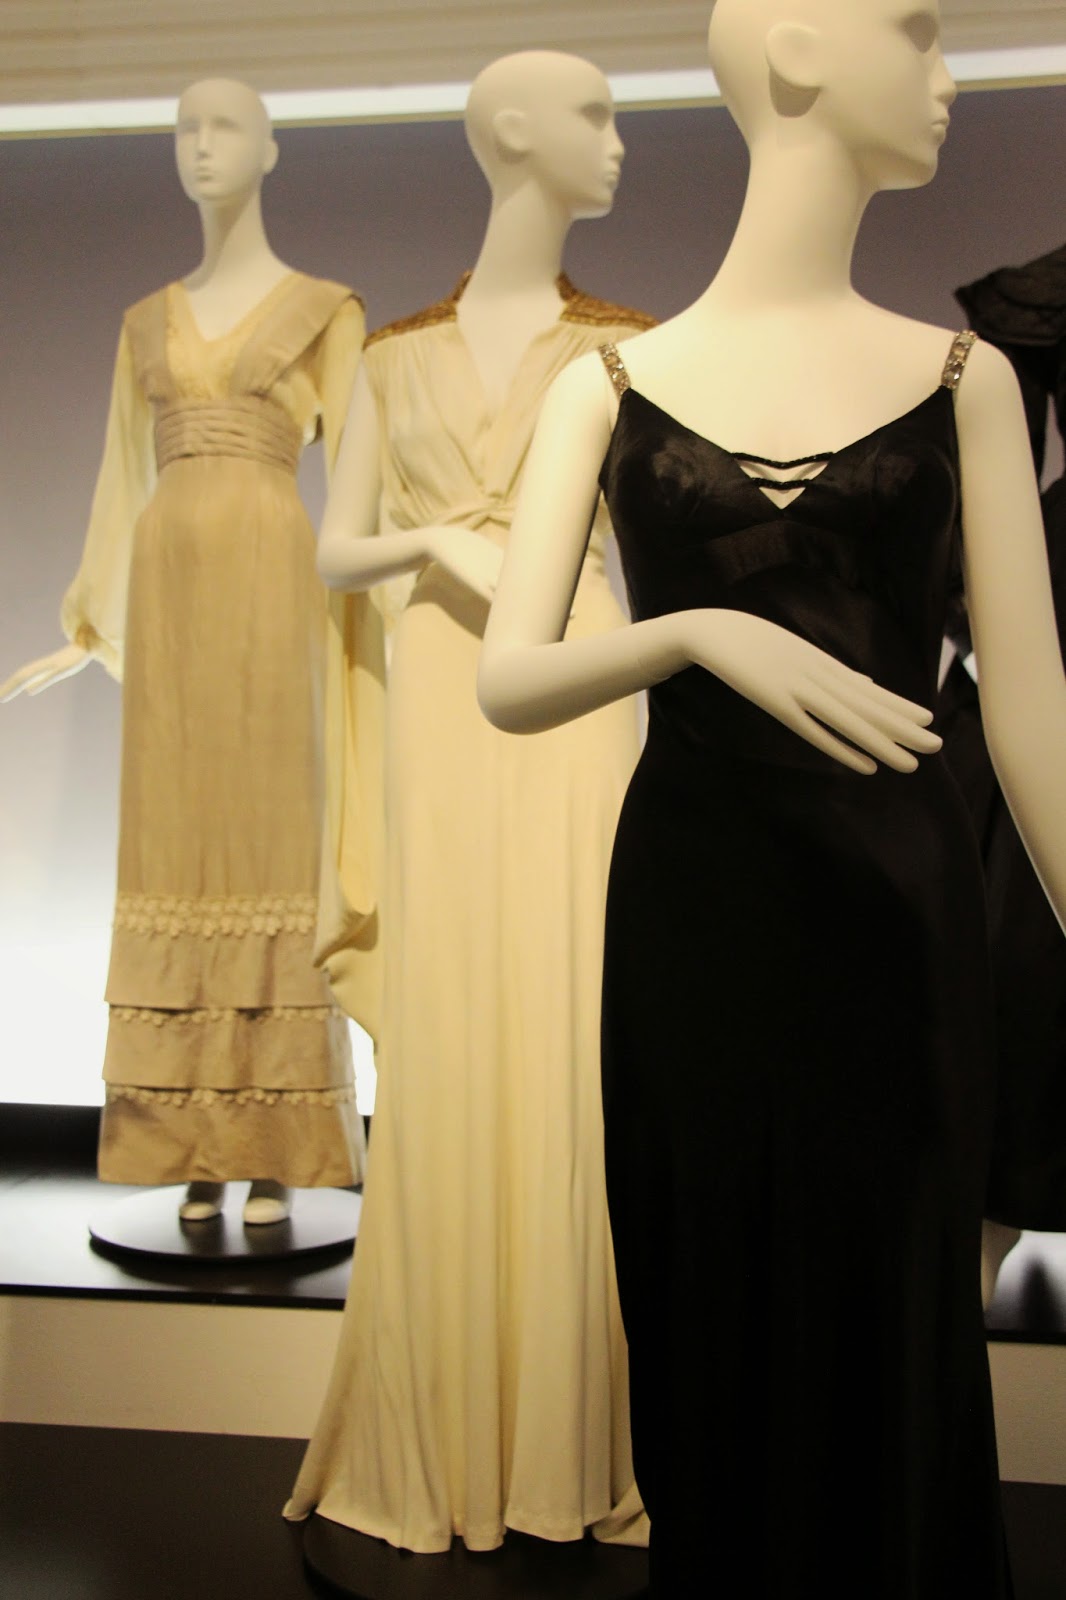 THE VINTAGE FILM COSTUME COLLECTOR: COSTUMES FROM THE GOLDEN AGE OF ...